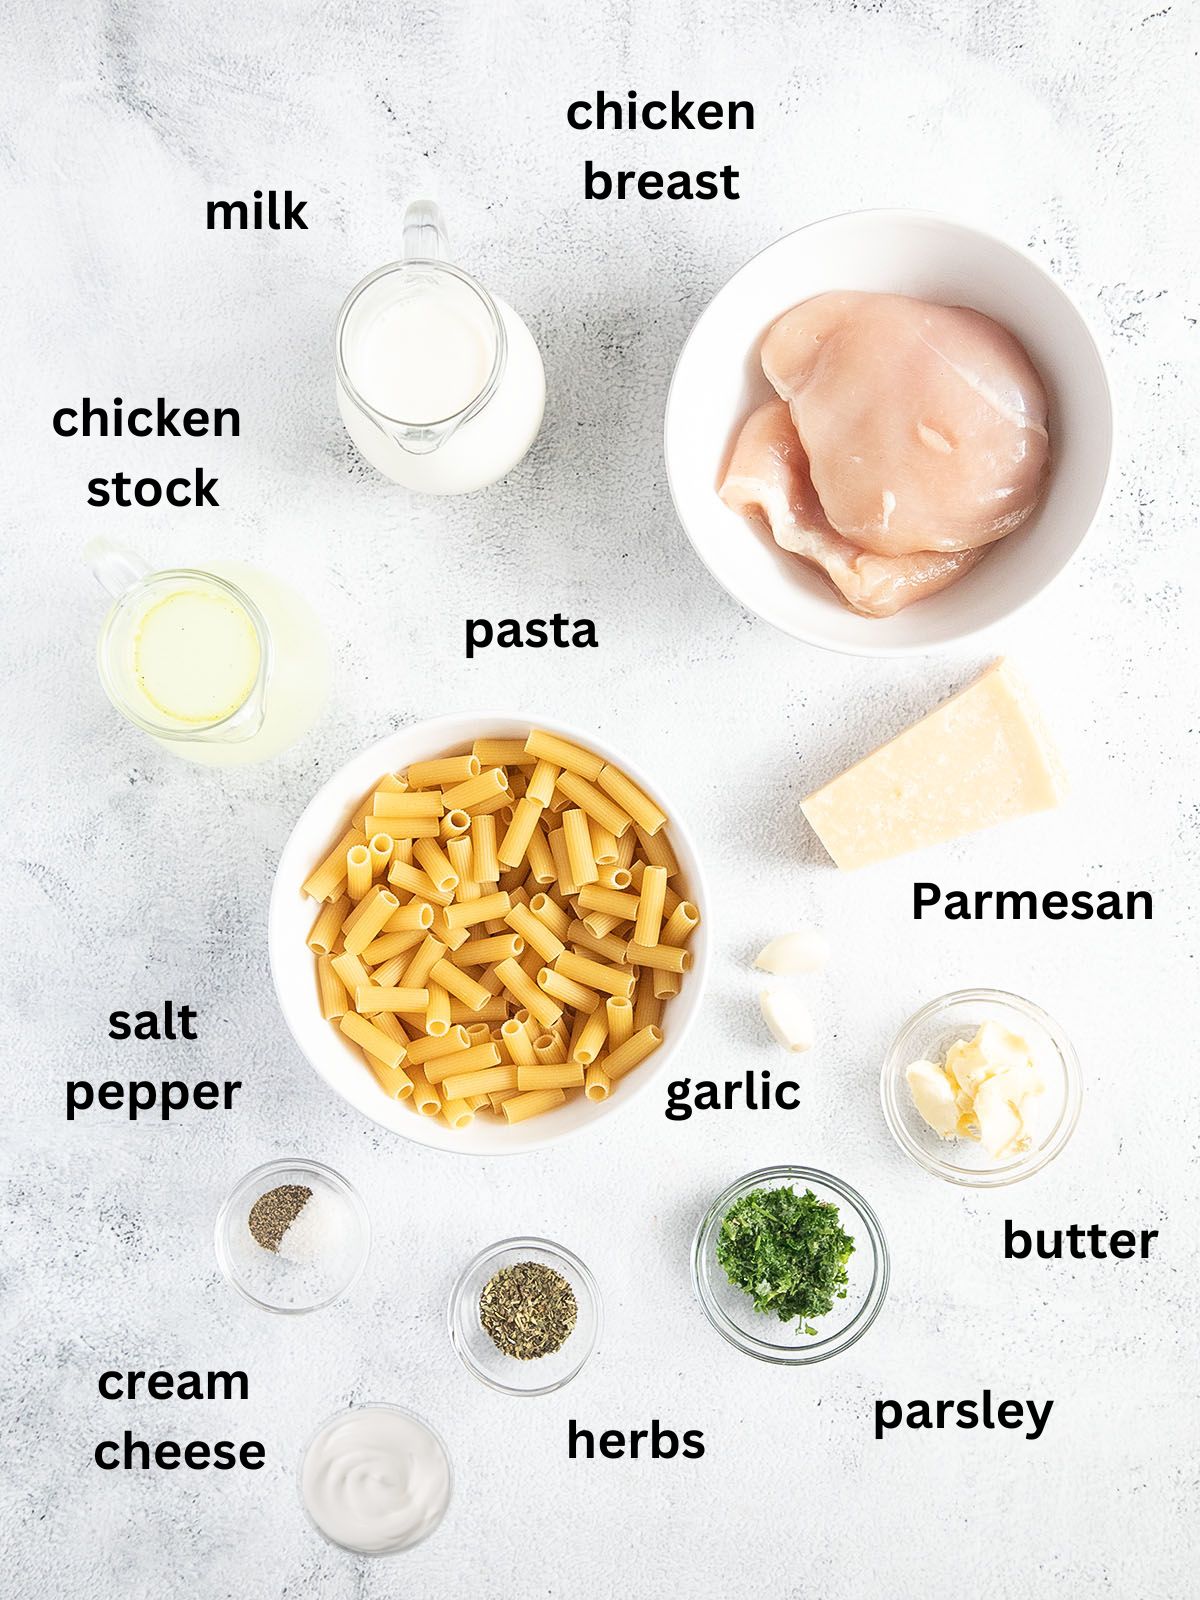 listed ingredients for cooking rigatoni with chicken breast, parmesan and garlic.